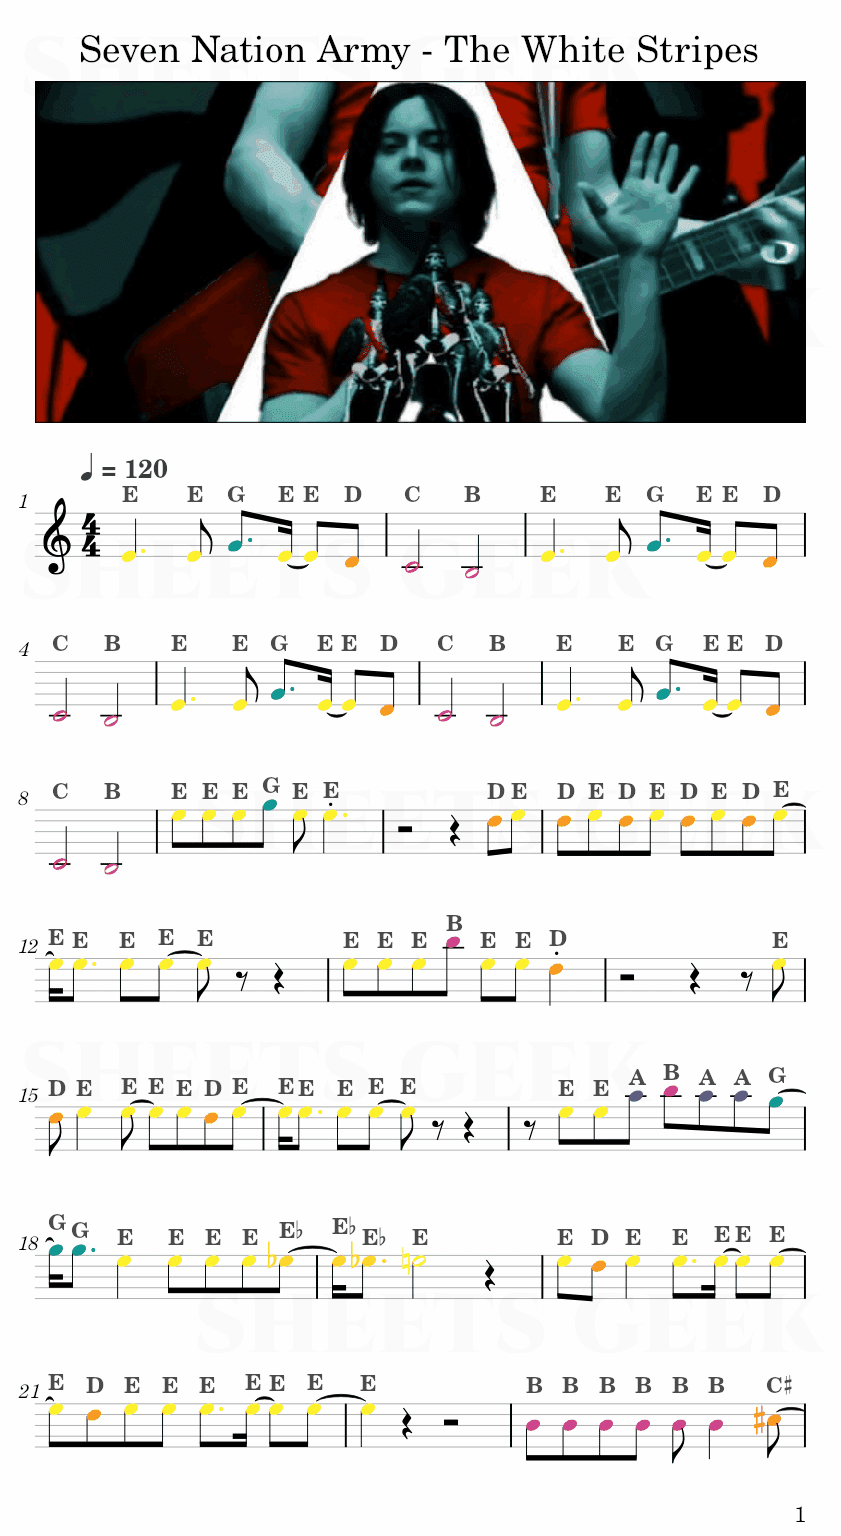 Seven Nation Army - The White Stripes Easy Sheet Music Free for piano, keyboard, flute, violin, sax, cello page 1